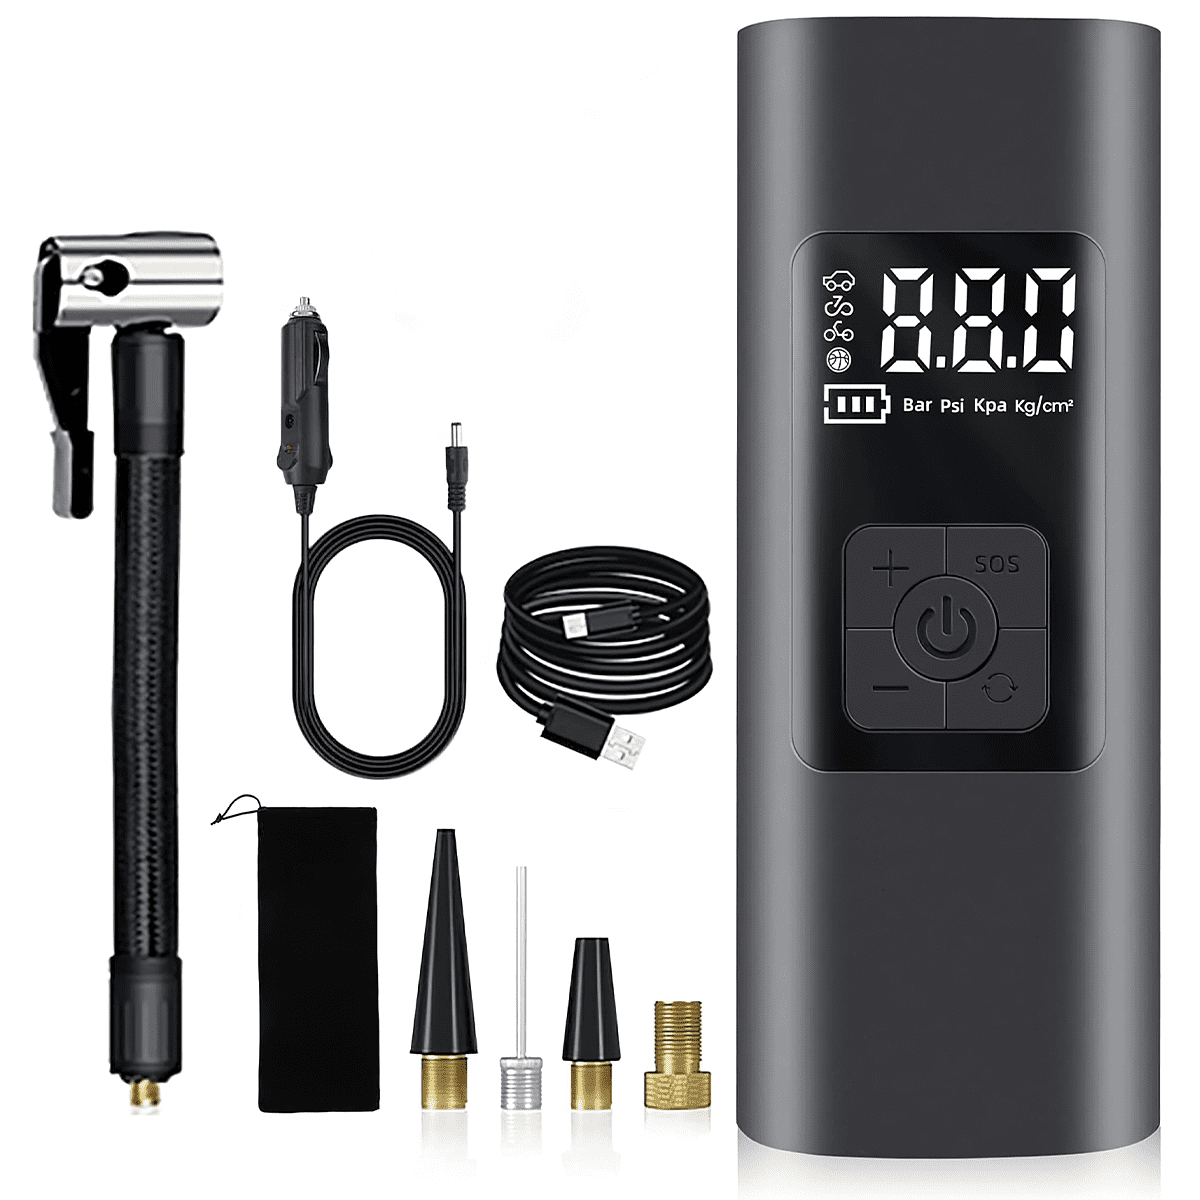 DNA MOTORING TOOLS-00270 150 PSI Wireless Portable Air Pump Tire Inflator  for Inflating Car, Truck & Motorcycle Tires, Balls